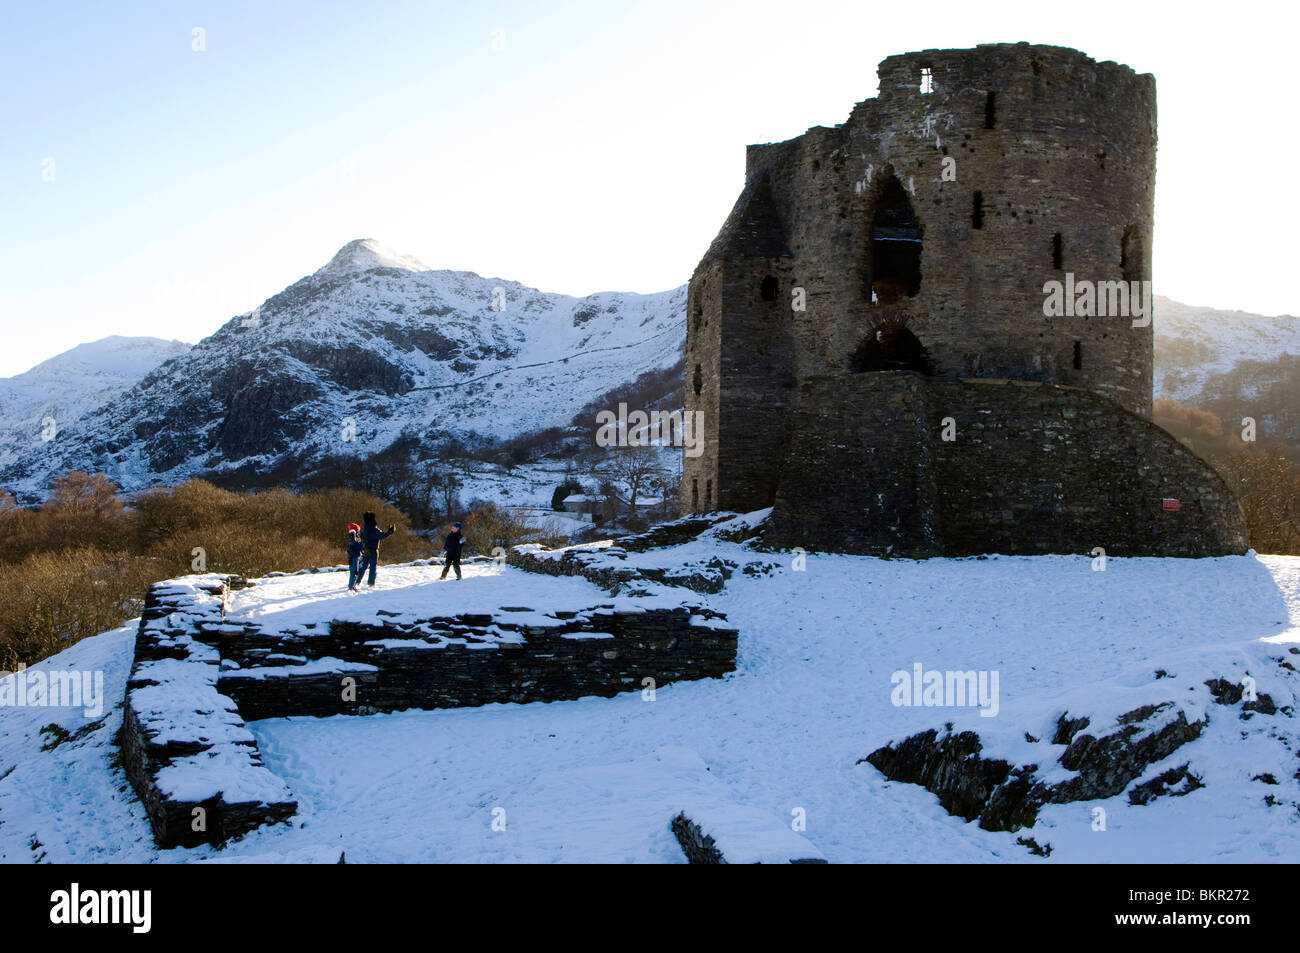 Wales, Gwynedd, Snowdonia. Dolbadarn Castle one of the great castles built by the Welsh princes in the C13th Stock Photo